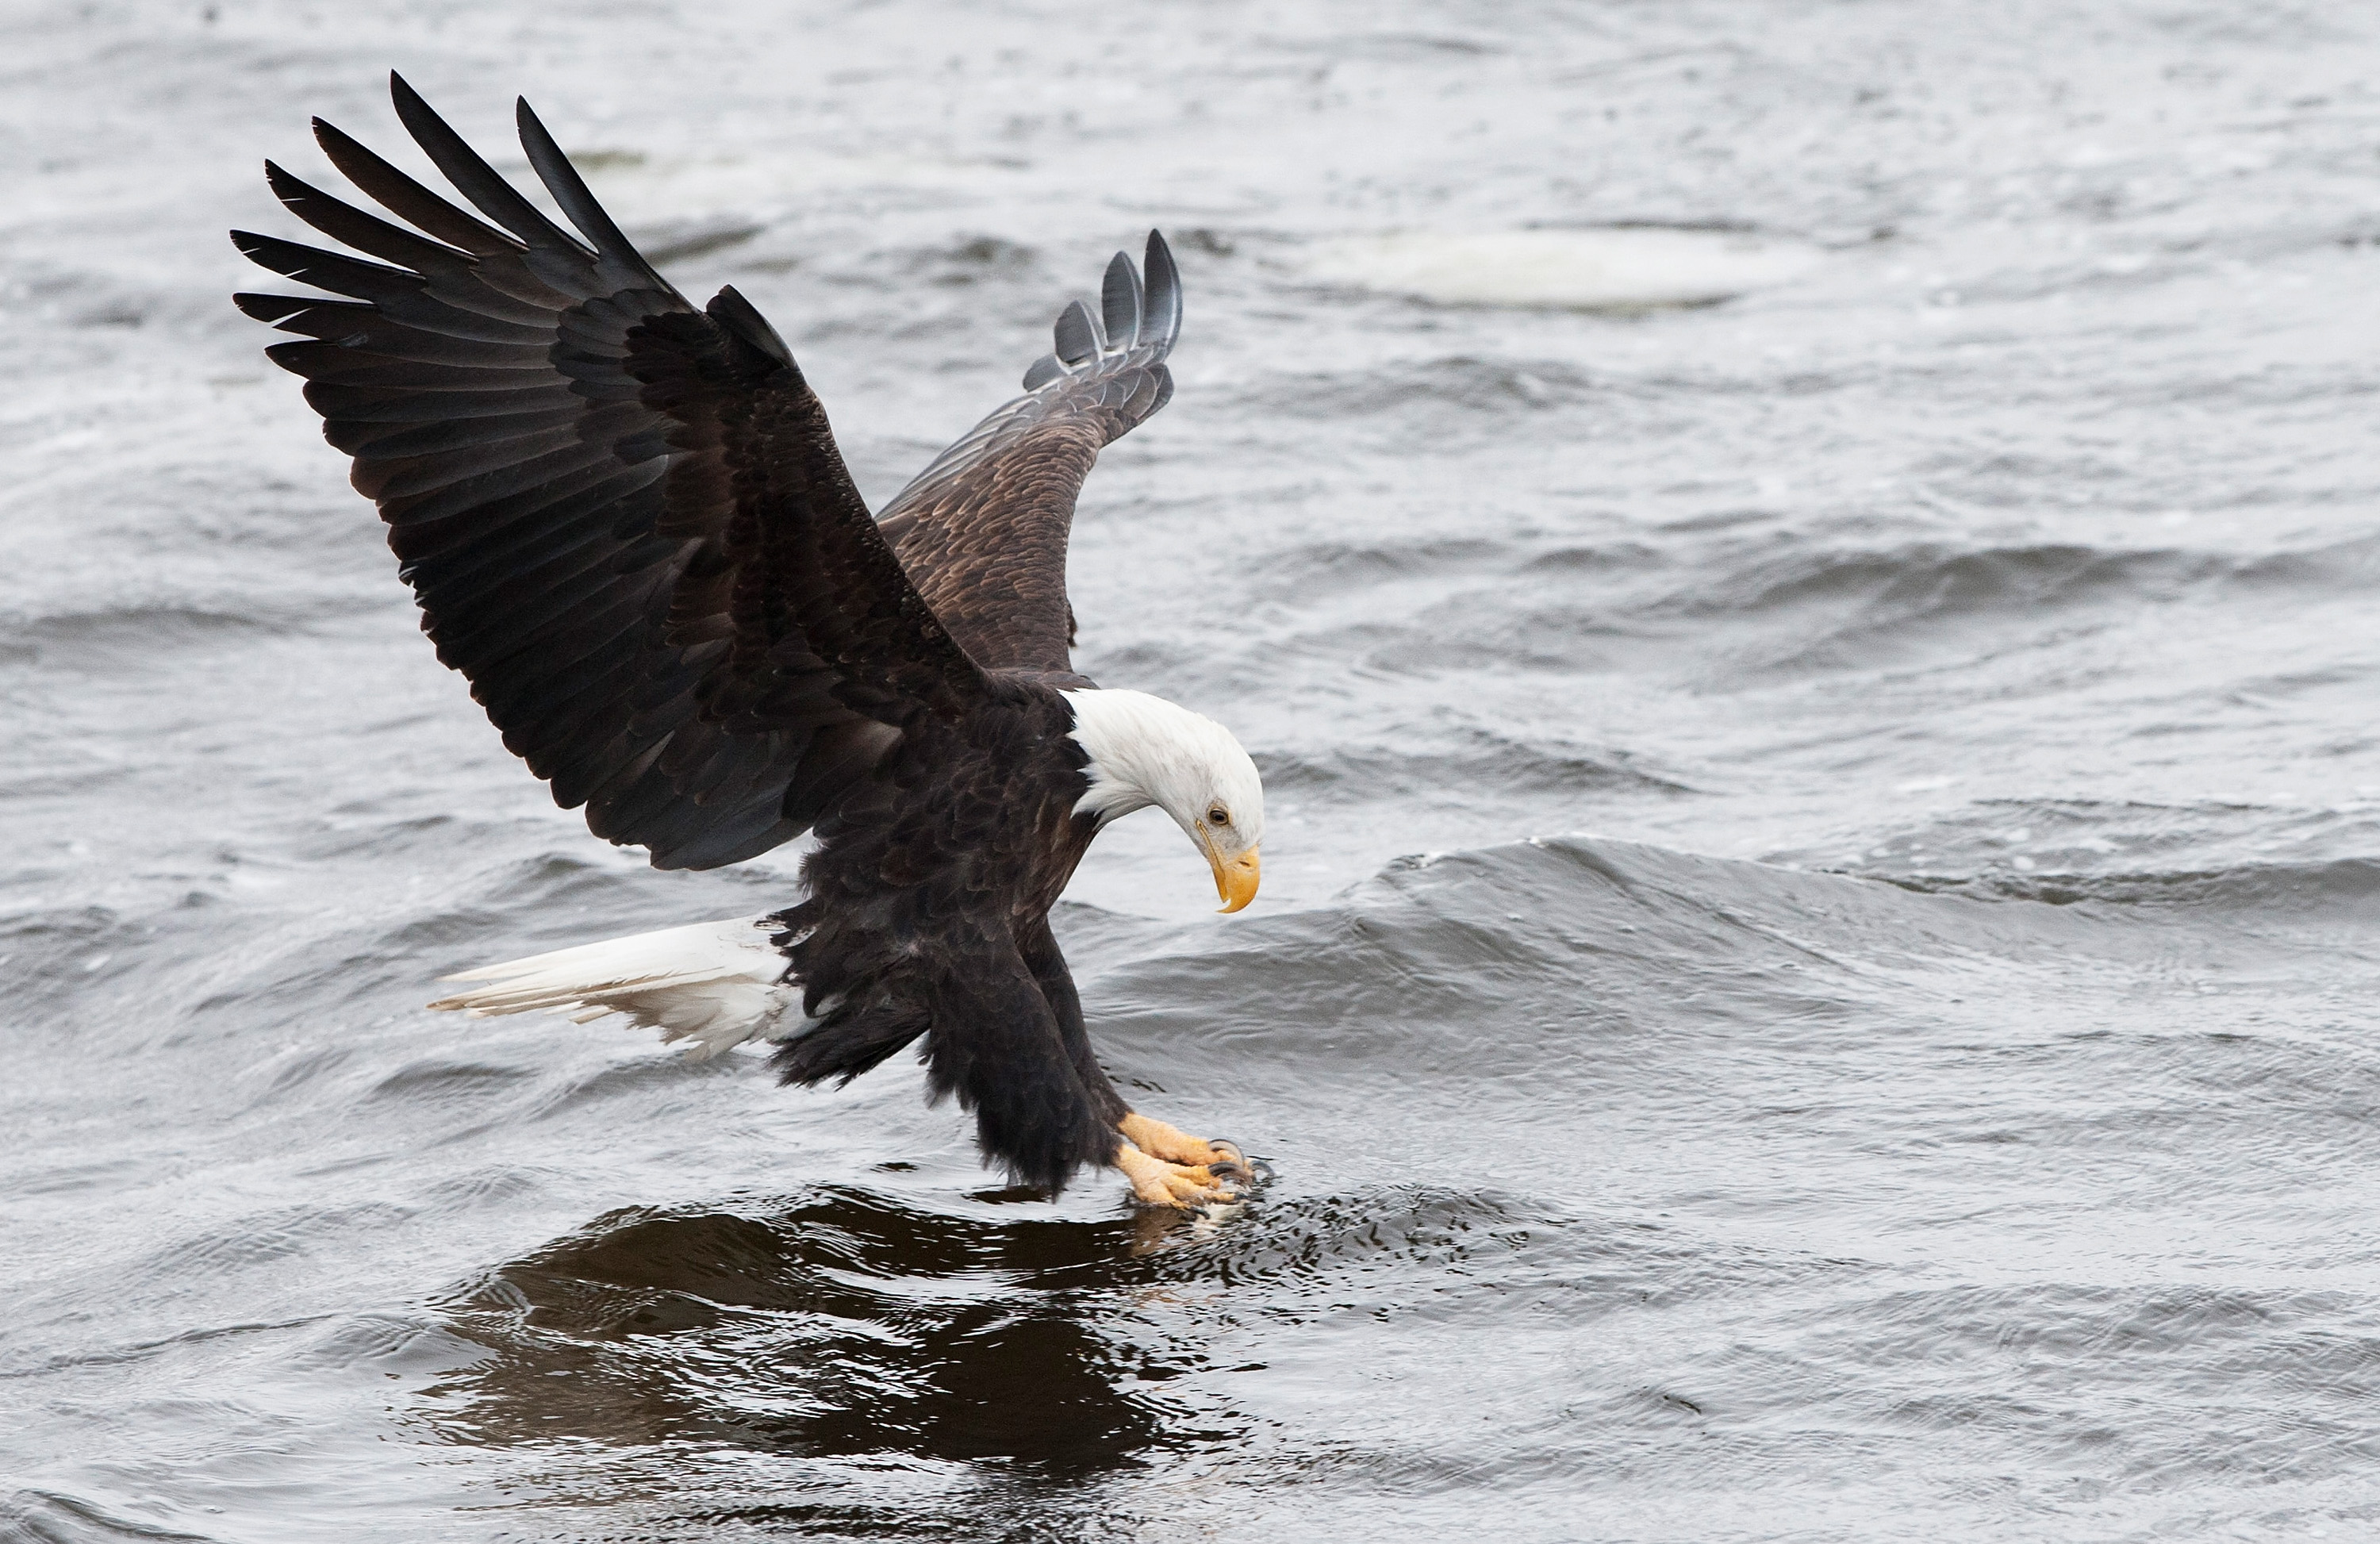 A bald eagle attempts to catch a fish at Mississippi River on January 11, 2015 in Rock Island, Illinois. (Gabriel Grams—Getty Images)